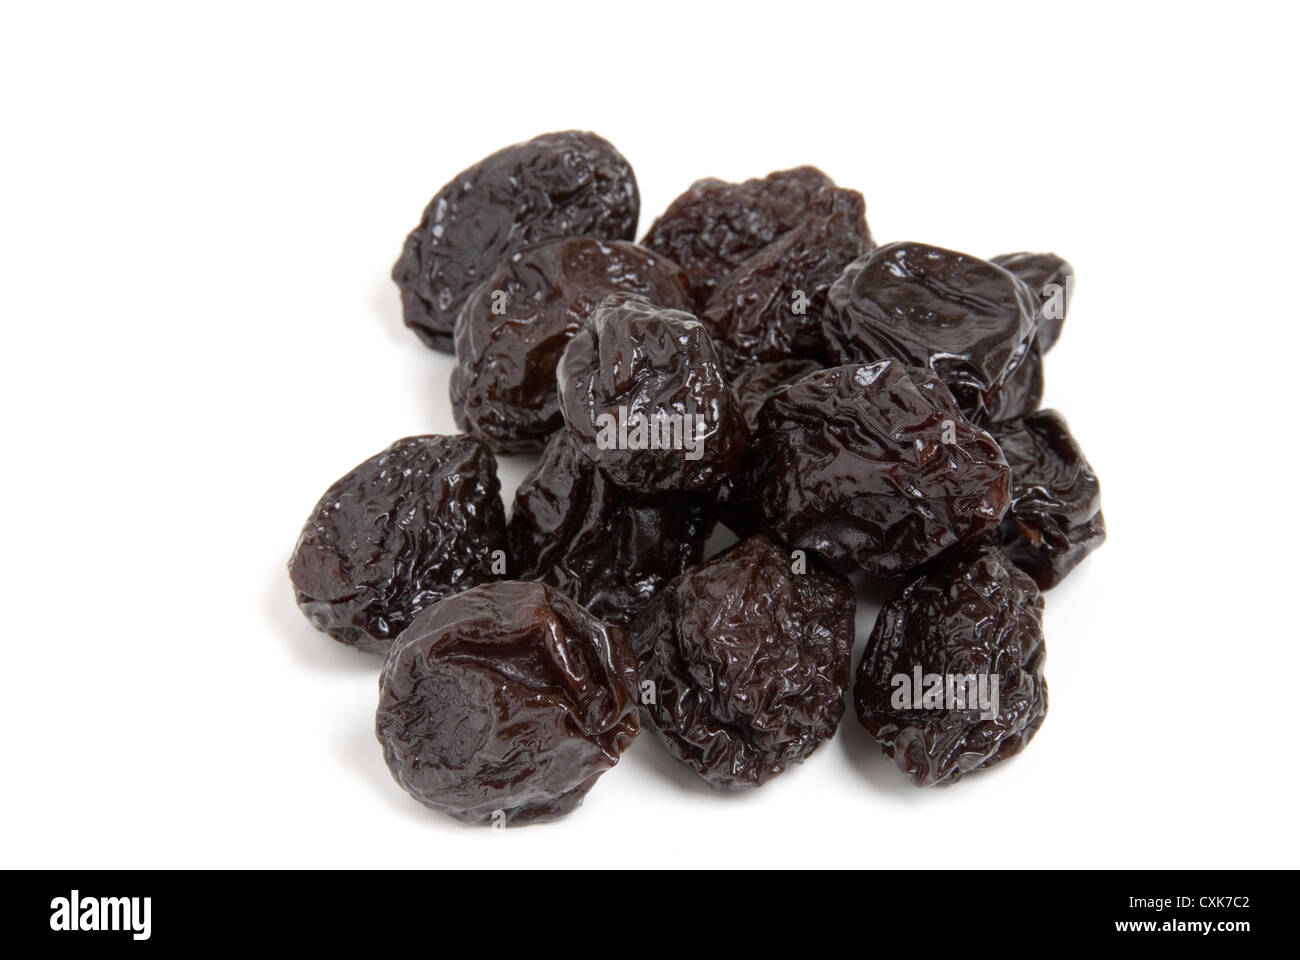 A pile of dried plums or prunes on a white background. Stock Photo